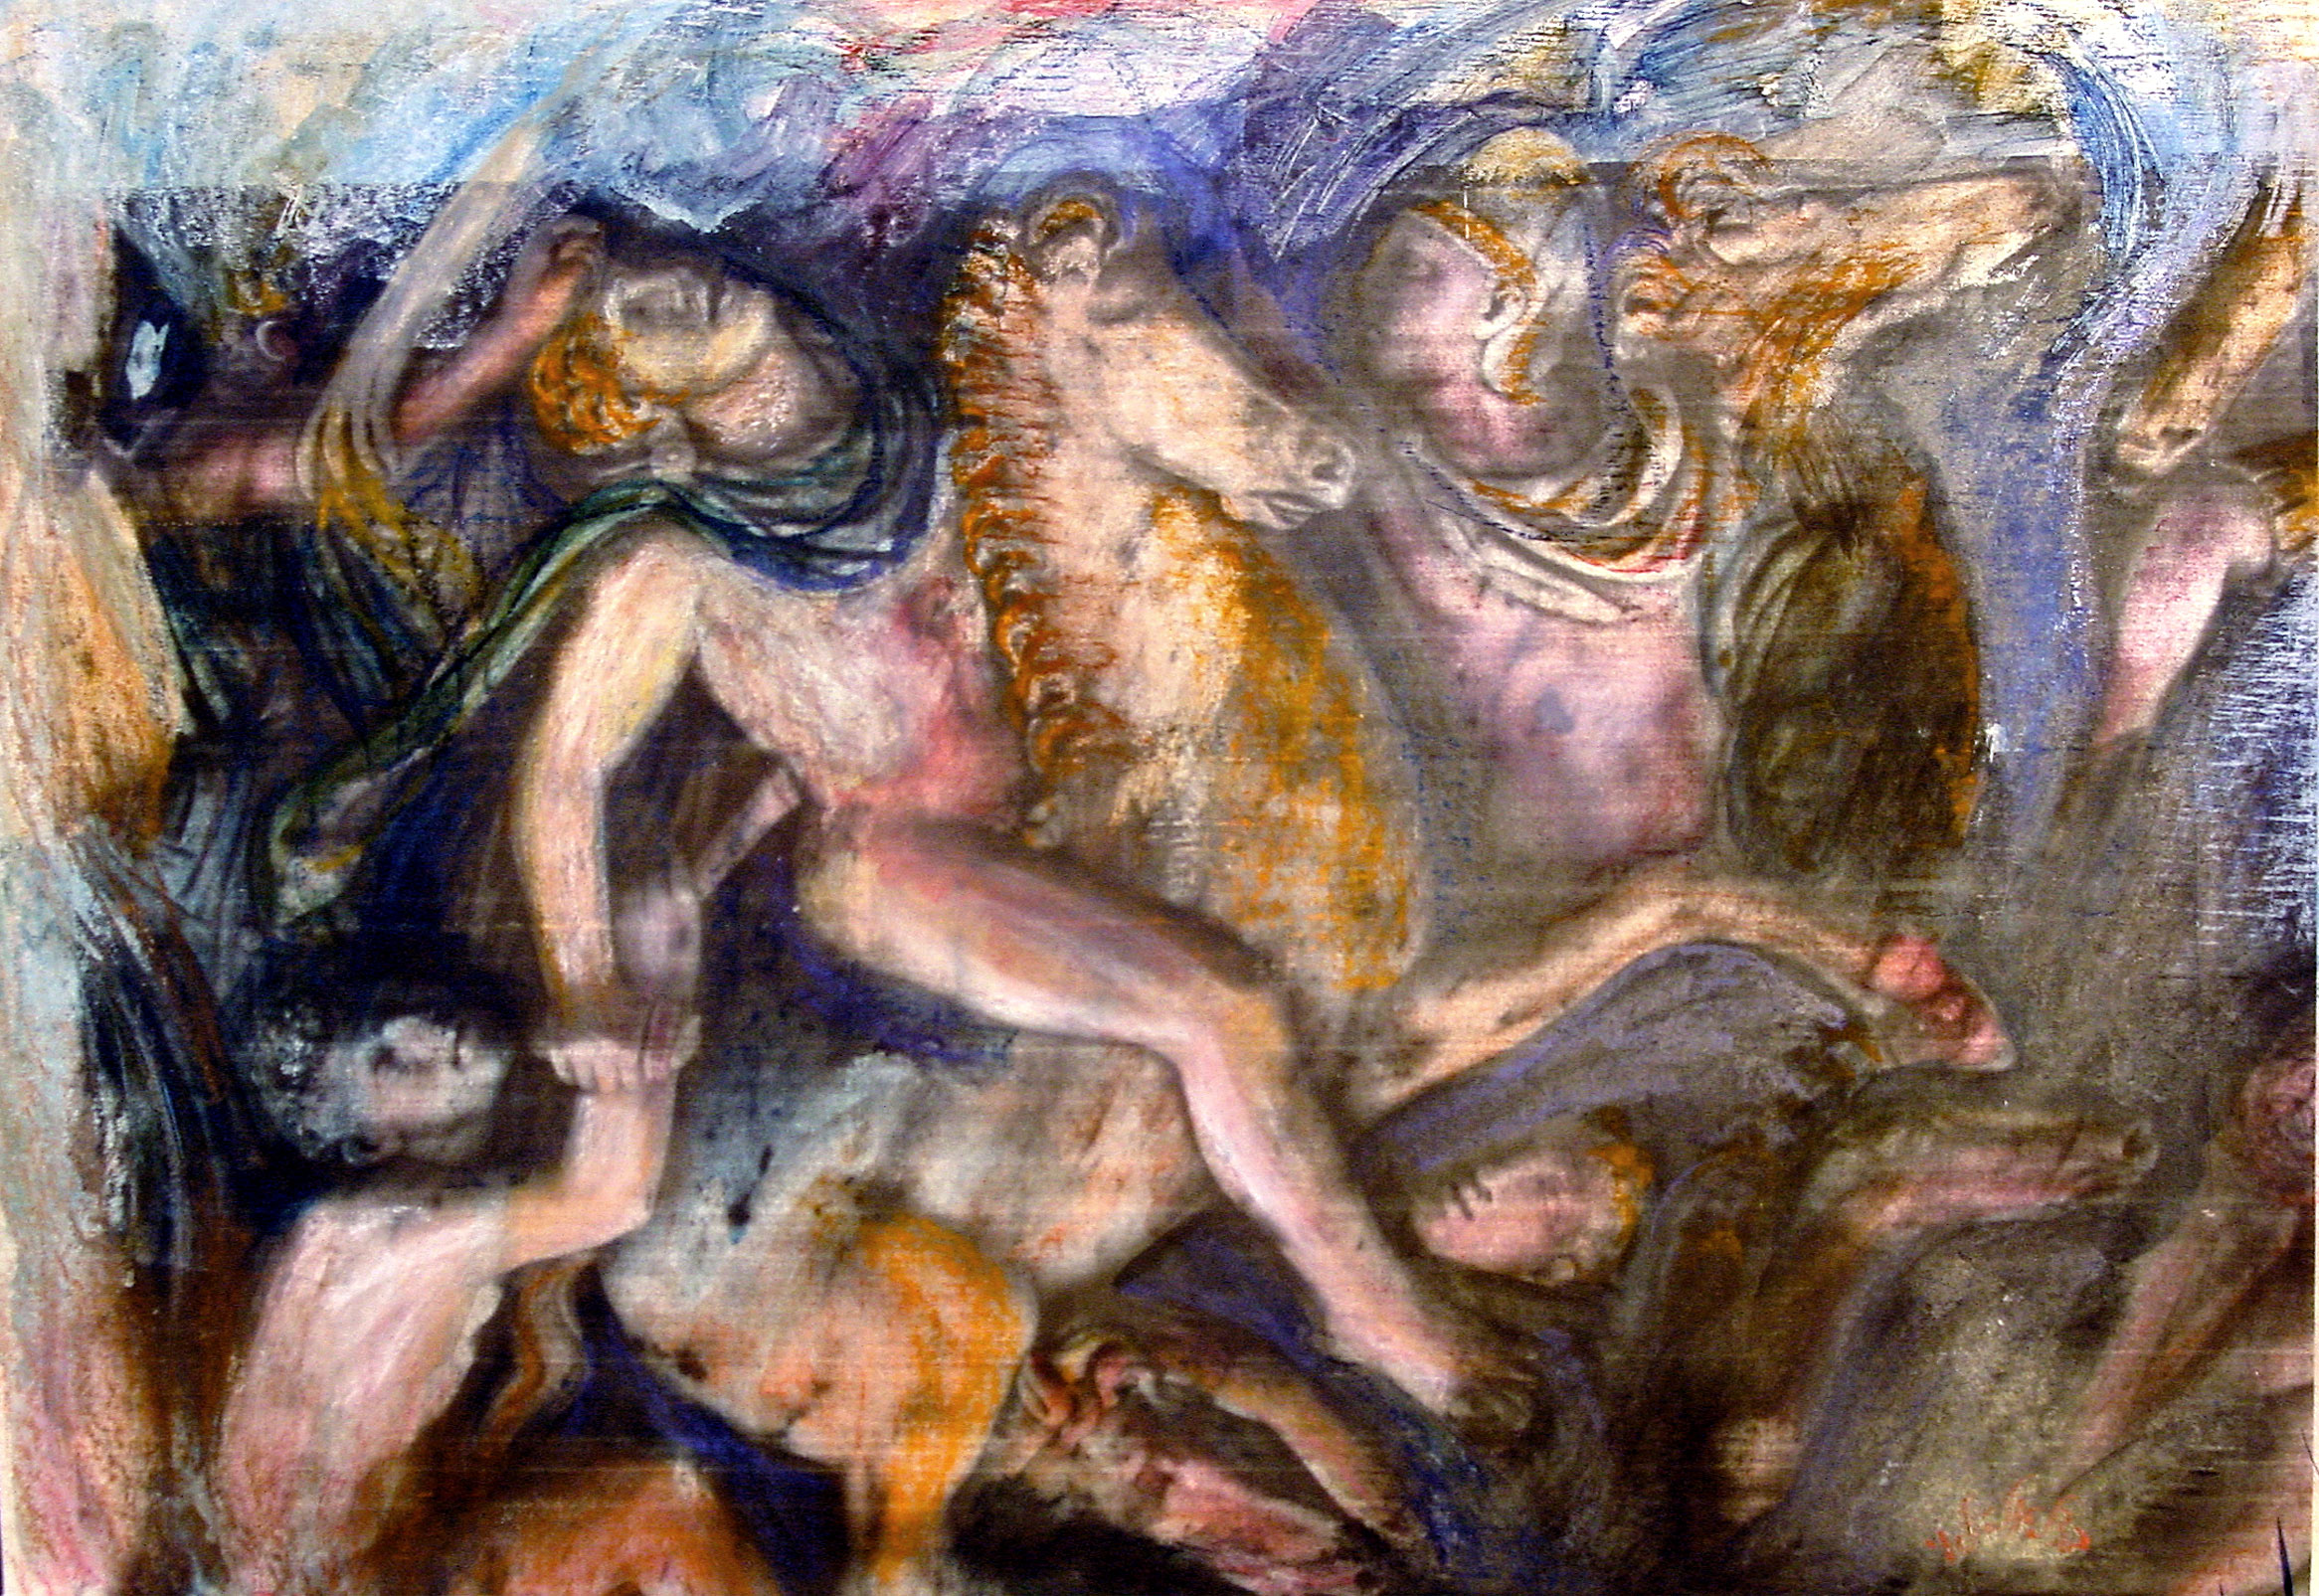 a painting of a naked figure on a rearing horse, with another figure pulling him from behind